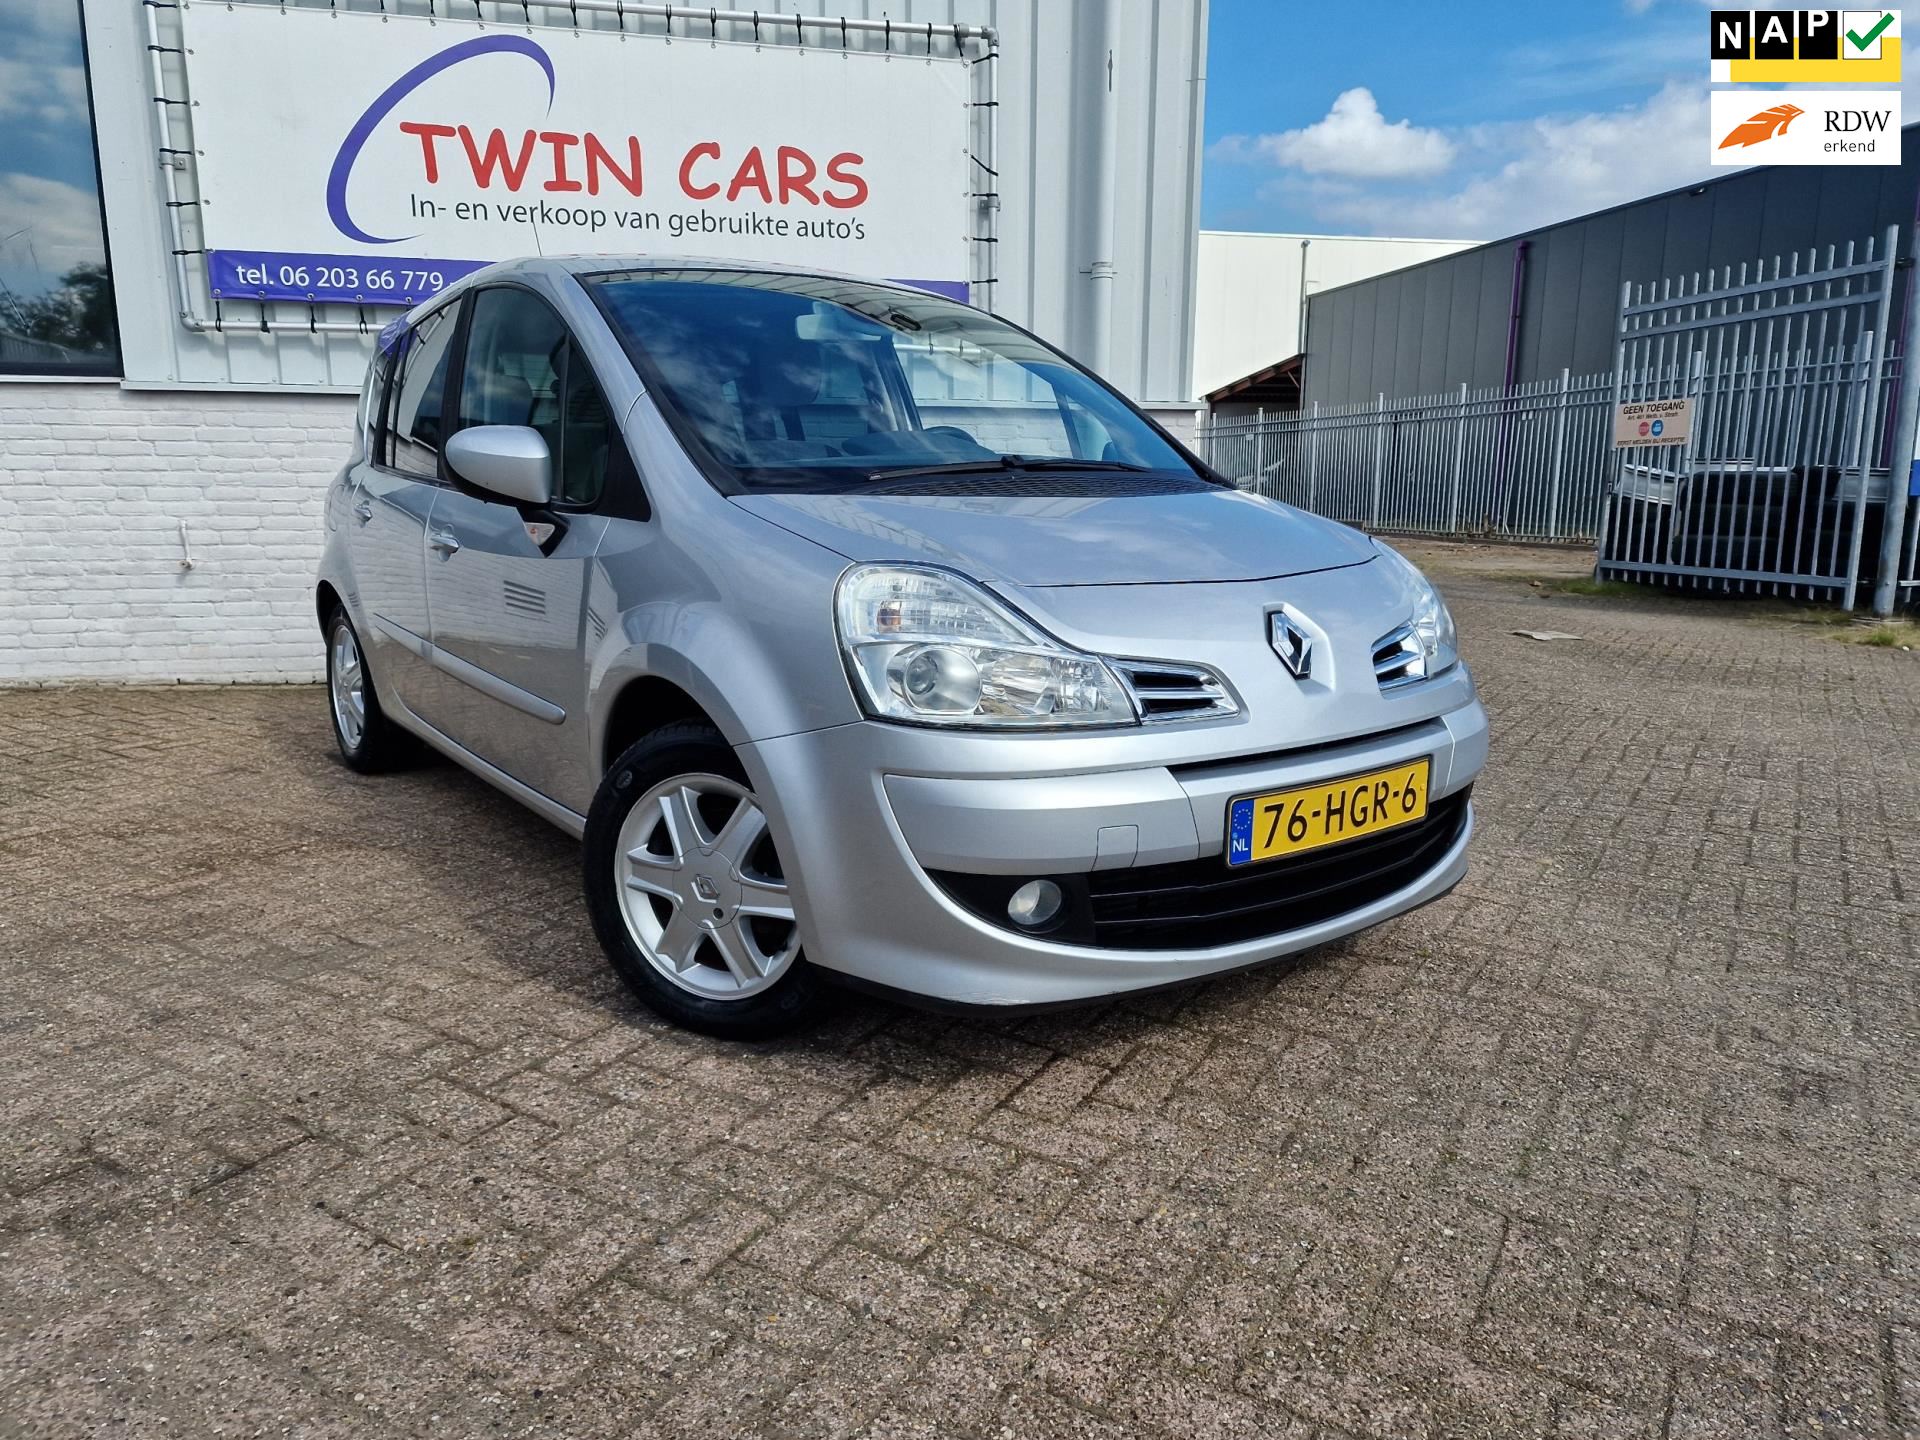 Renault Grand Modus occasion - Twin cars